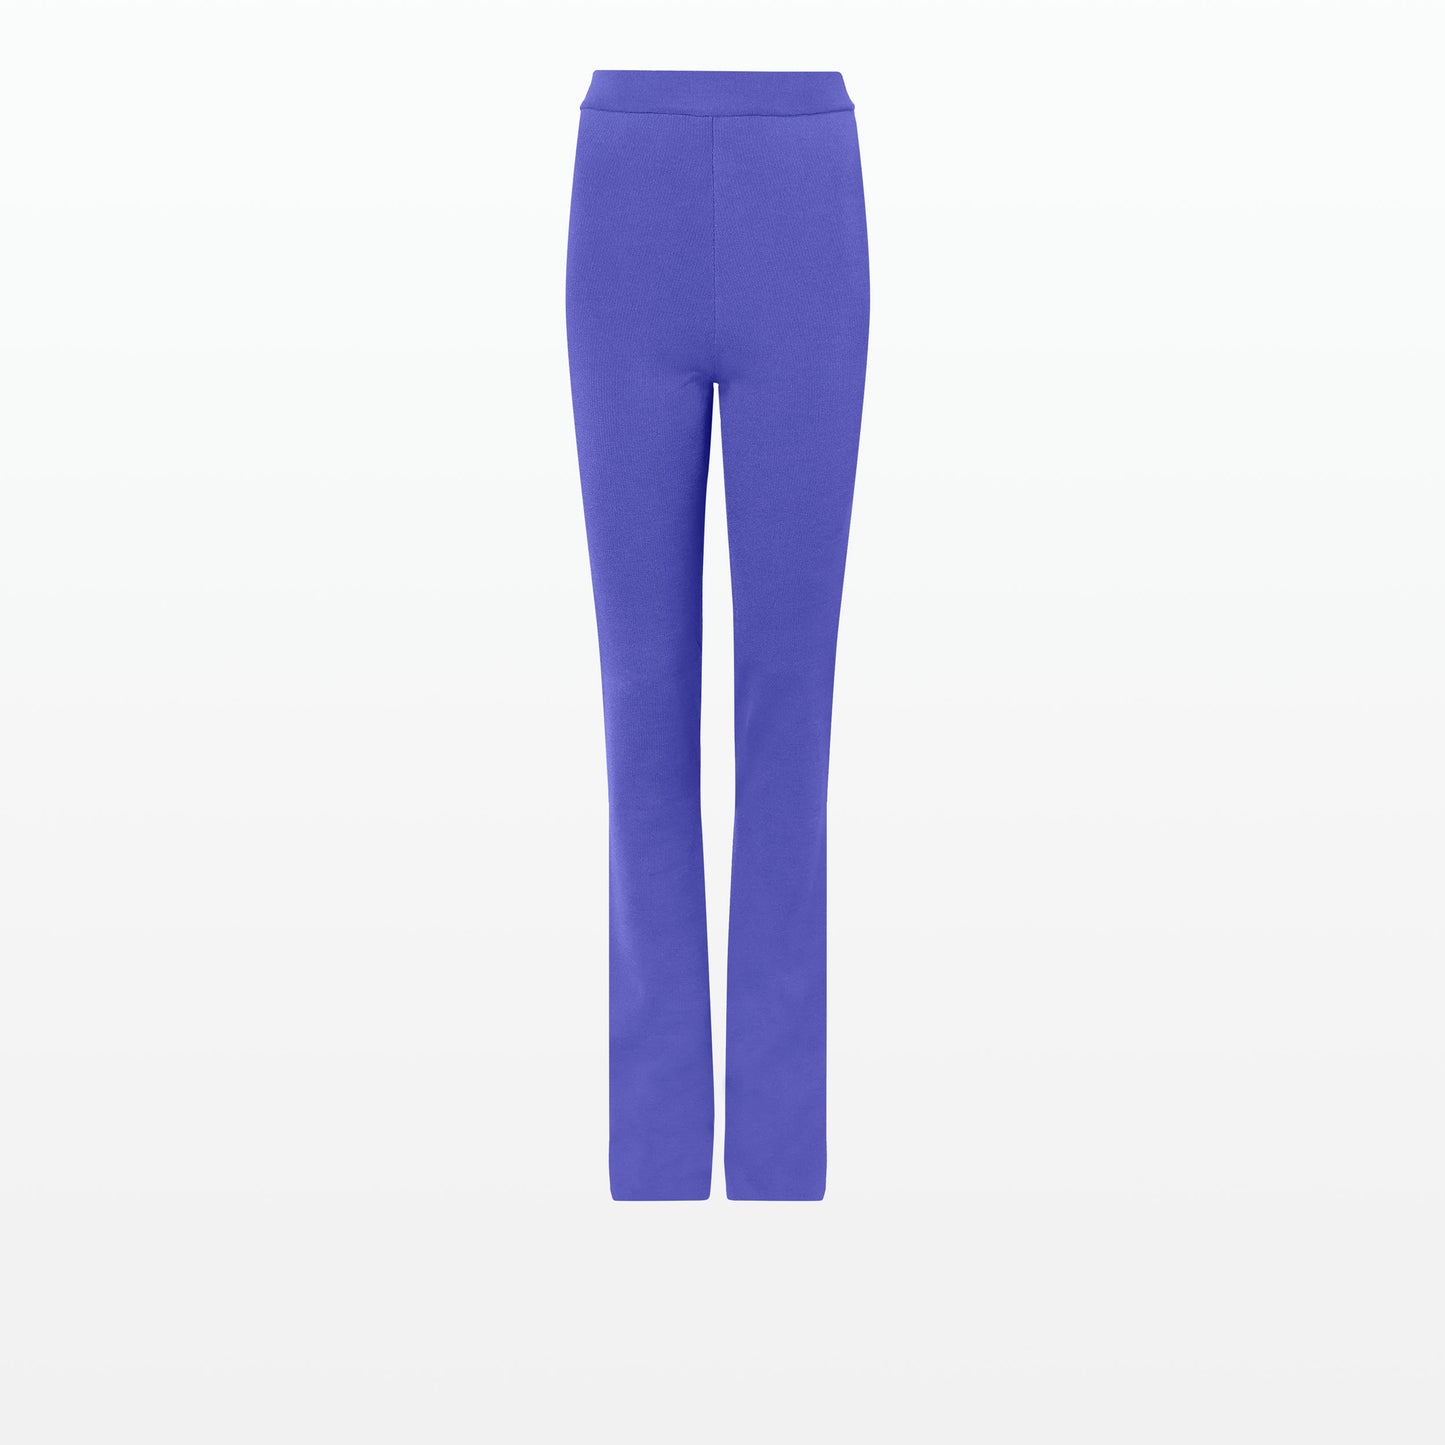 Khuno Anemone Blue Knit Trousers